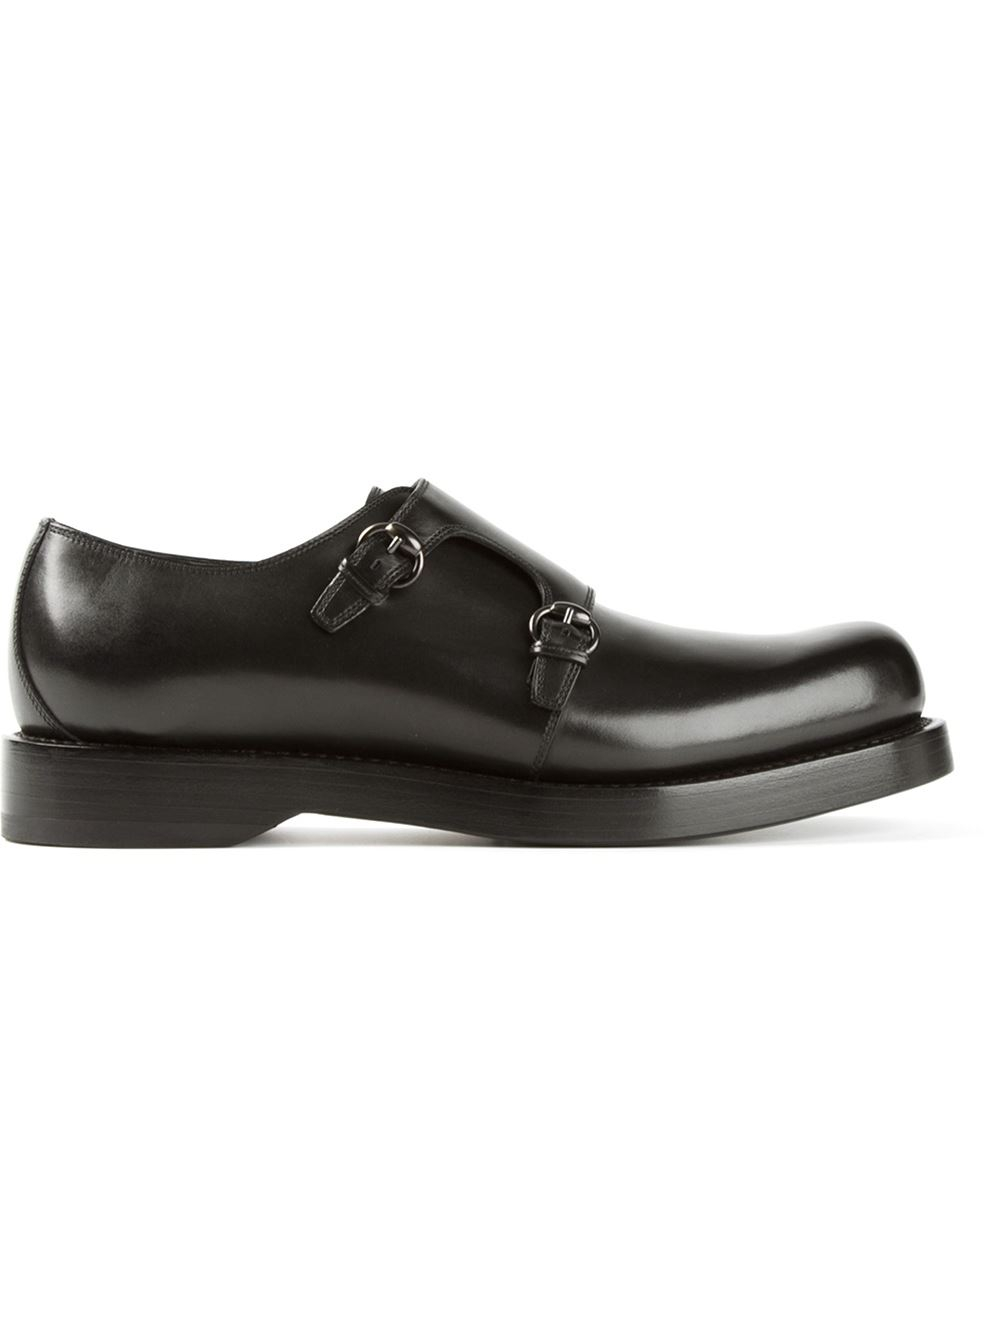 Lyst - Gucci Chunky Monk Shoes in Black for Men